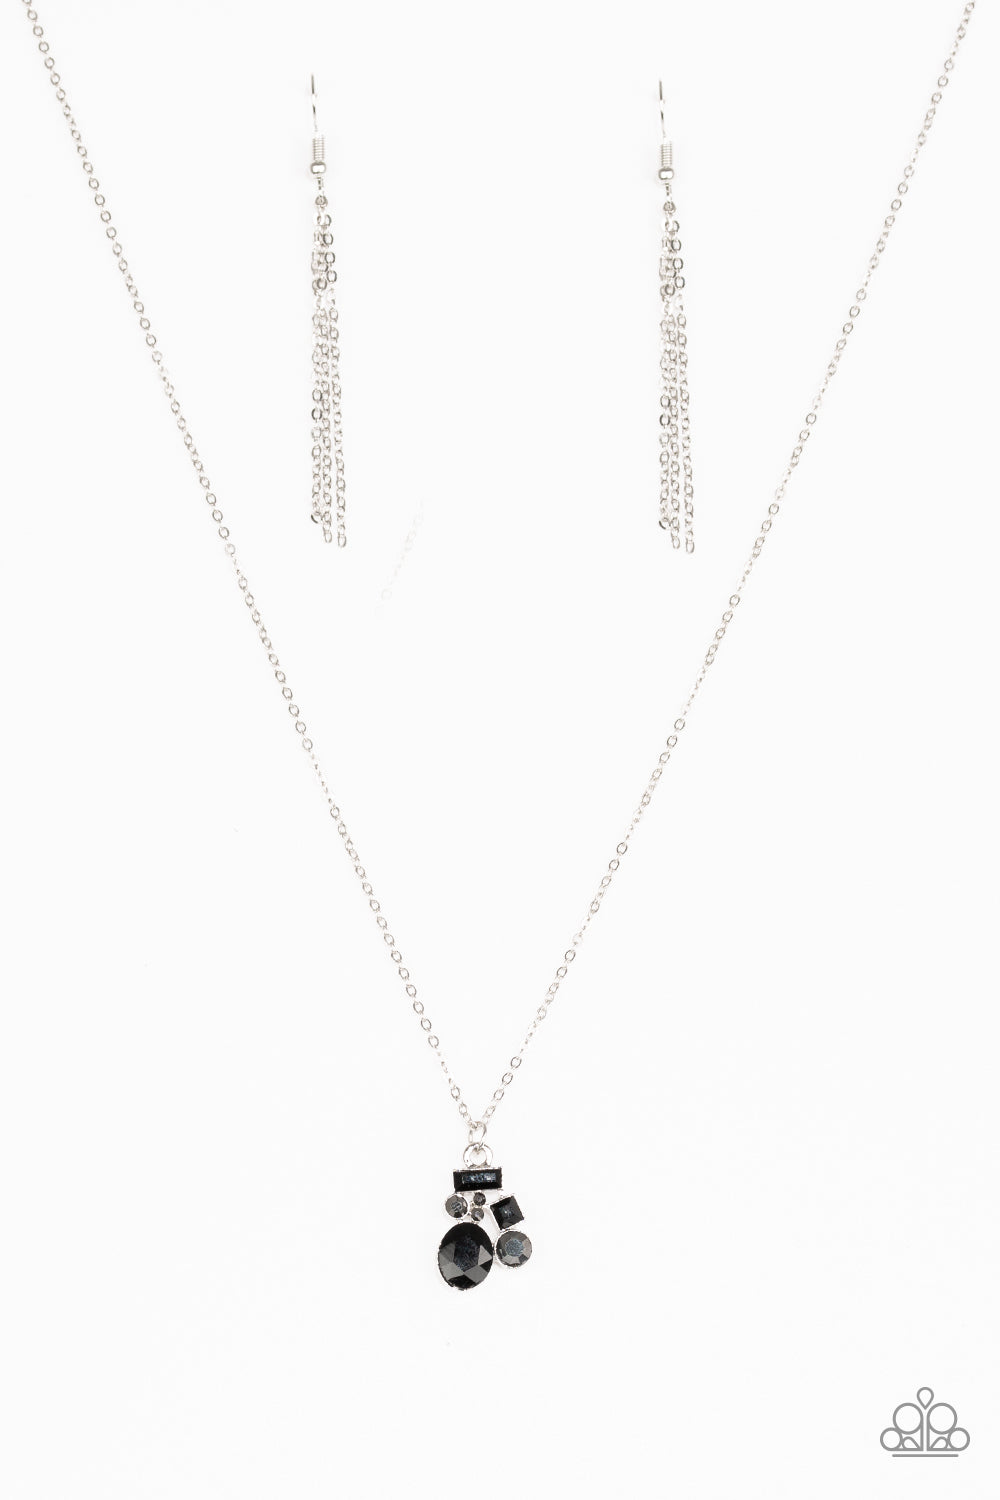 pittmanbling-and-jewelry-inc-presentstime-to-be-timeless-black-necklace-paparazzi-accessories